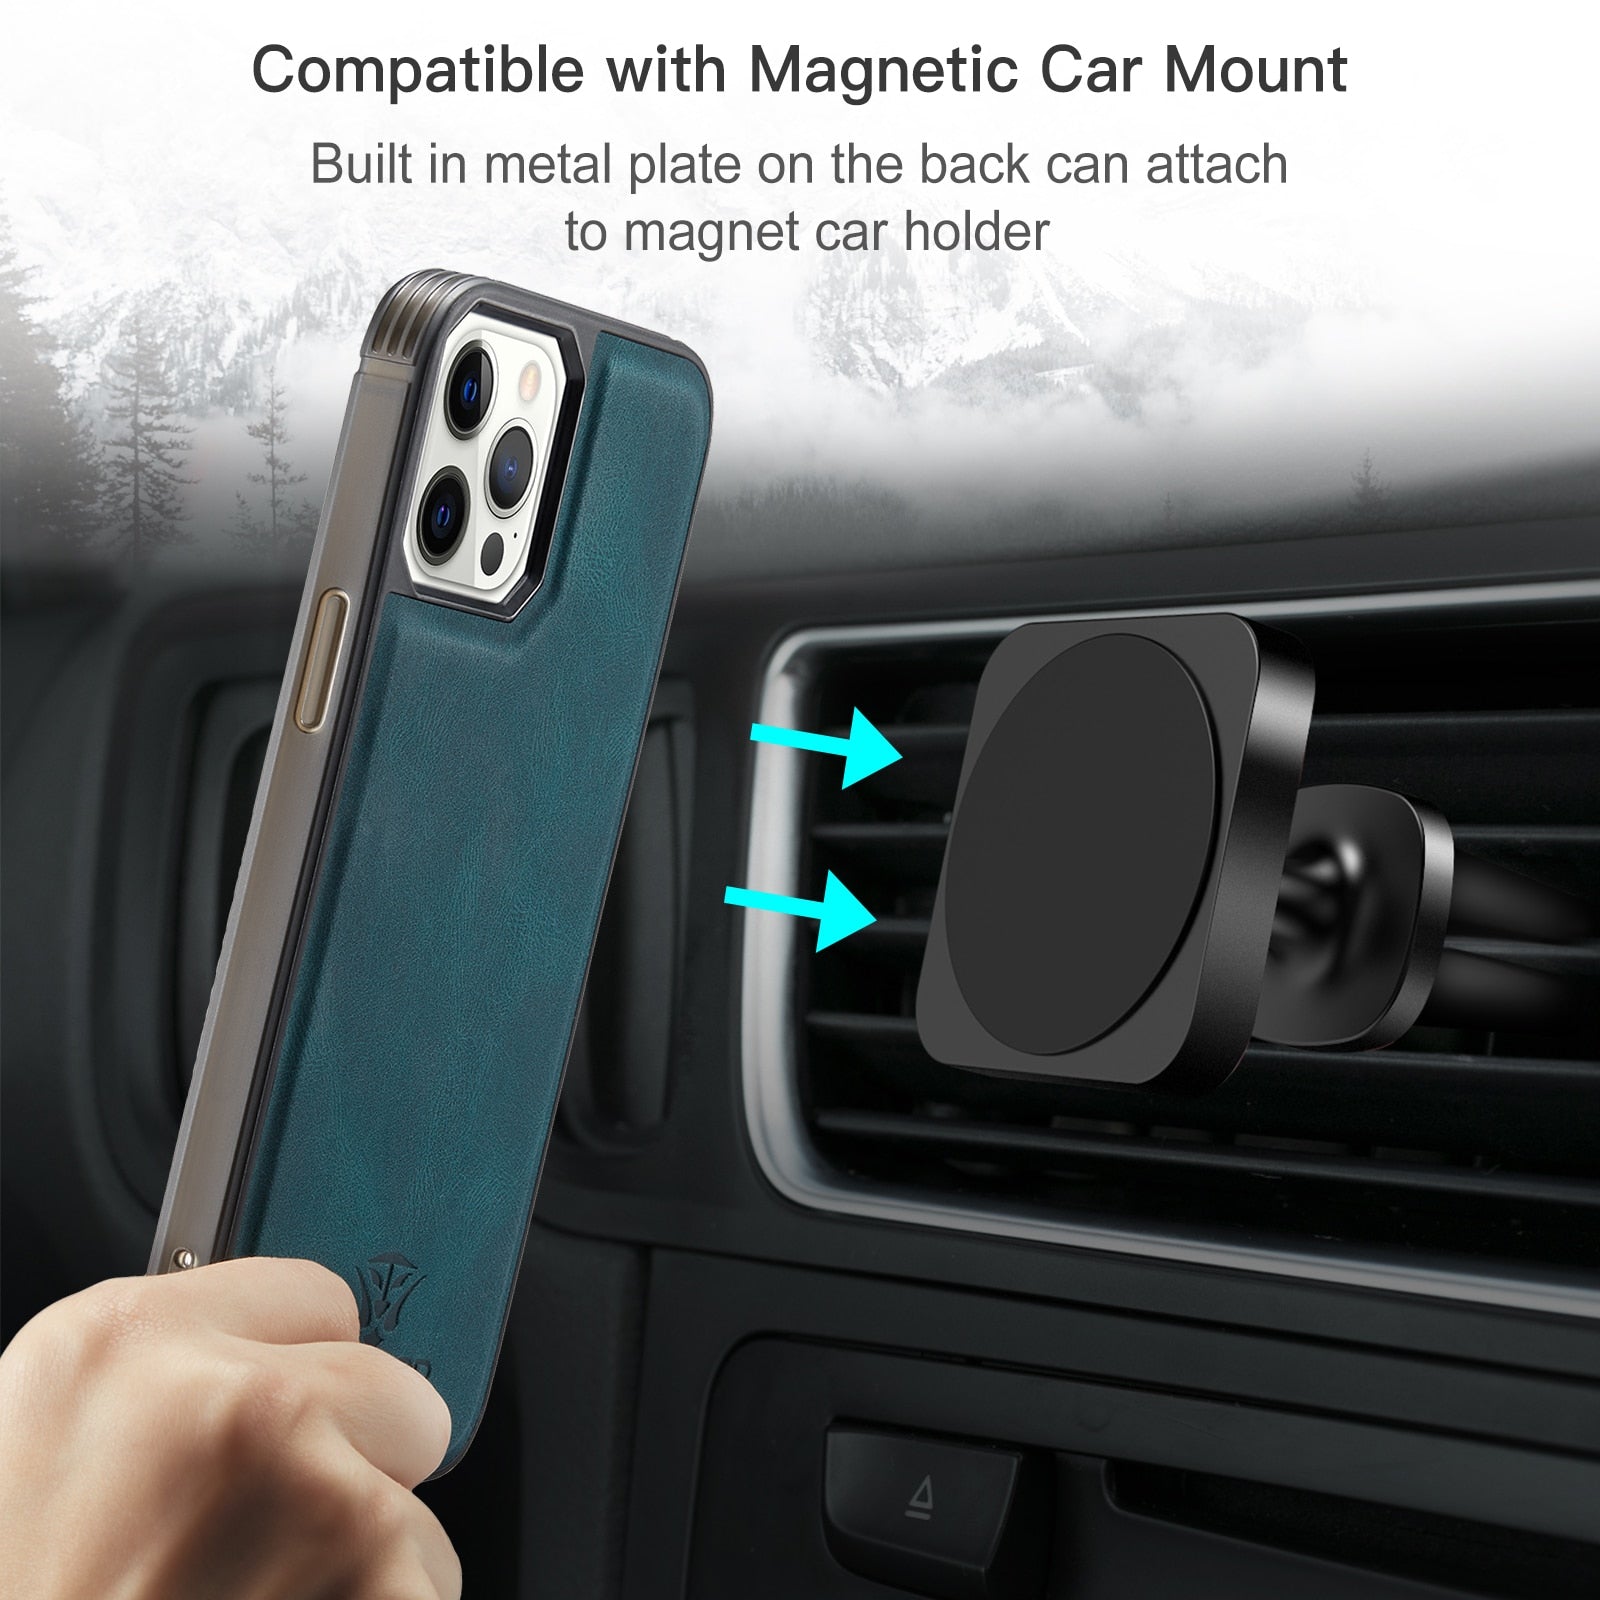 Blue Color Leather Wallet Card Solt Bag Magnetic Case For iPhone 12 Mini Pro Max Case For iPhone 11 Pro Max 8 7Plus Xr Xs Max X SE 2020 - 380230 Find Epic Store